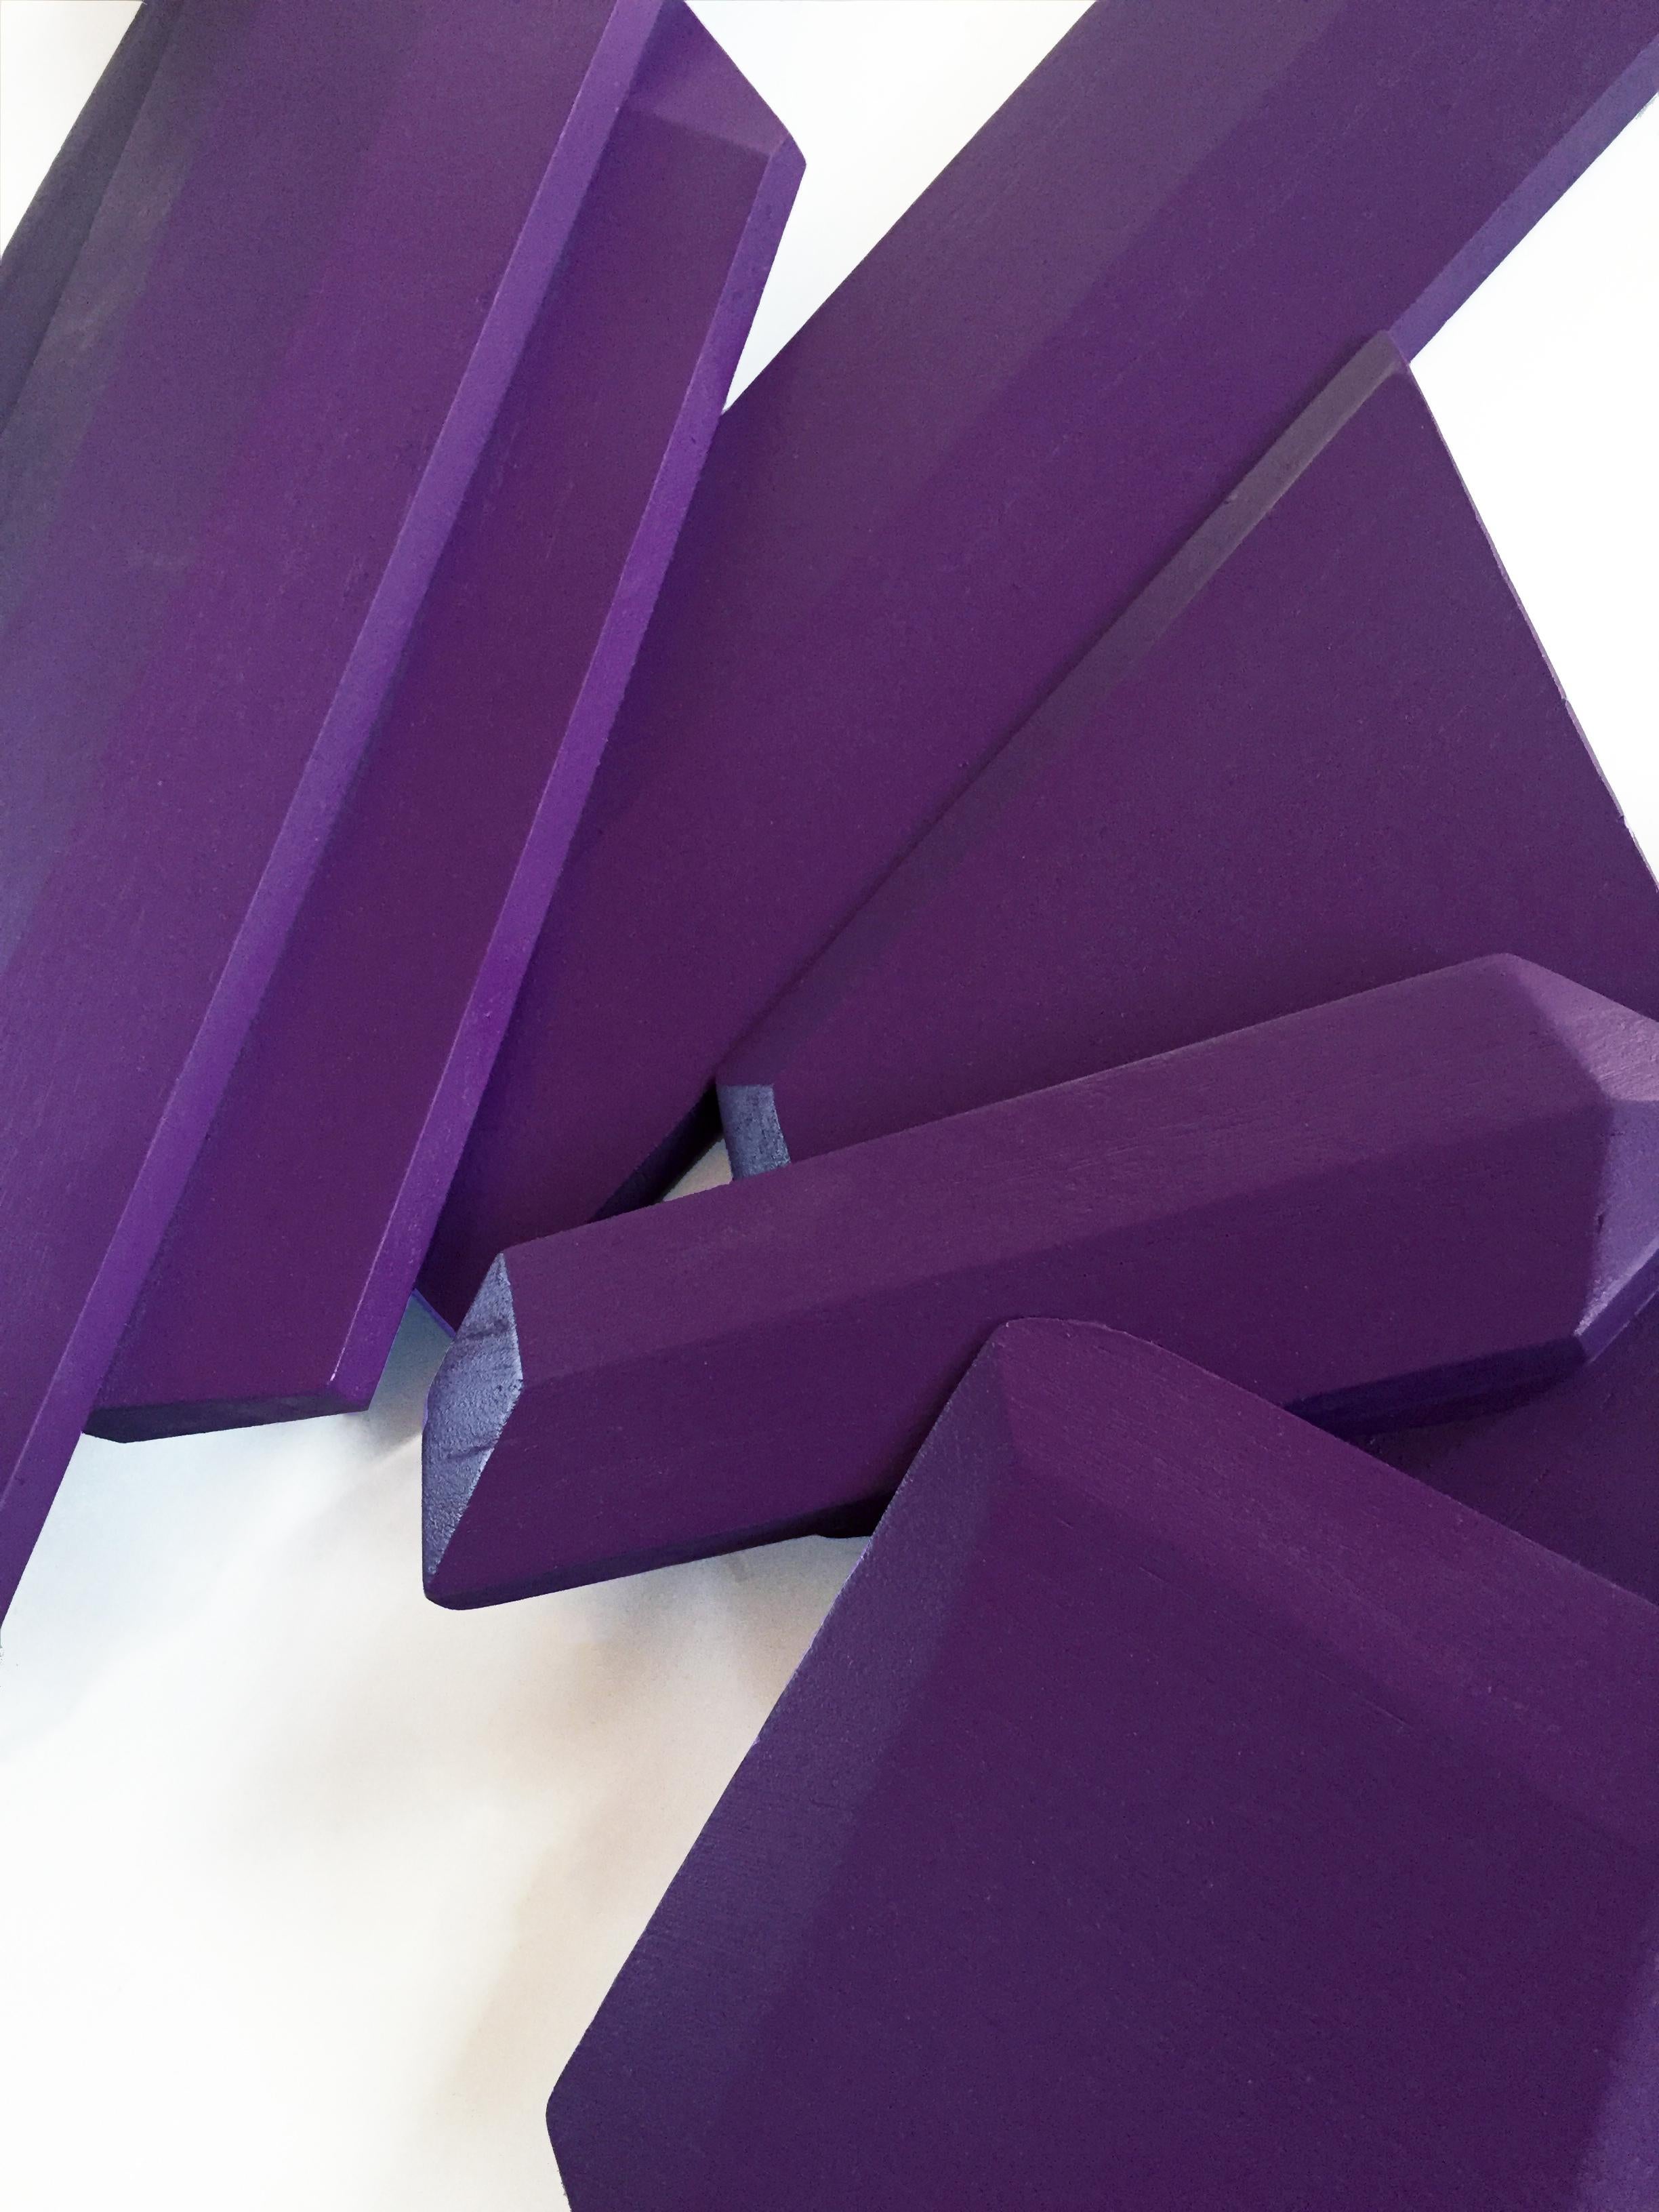 Ultra Violet Crystal (wood, contemporary design, geometric, purple, sculpture) - Abstract Sculpture by Chloe Hedden